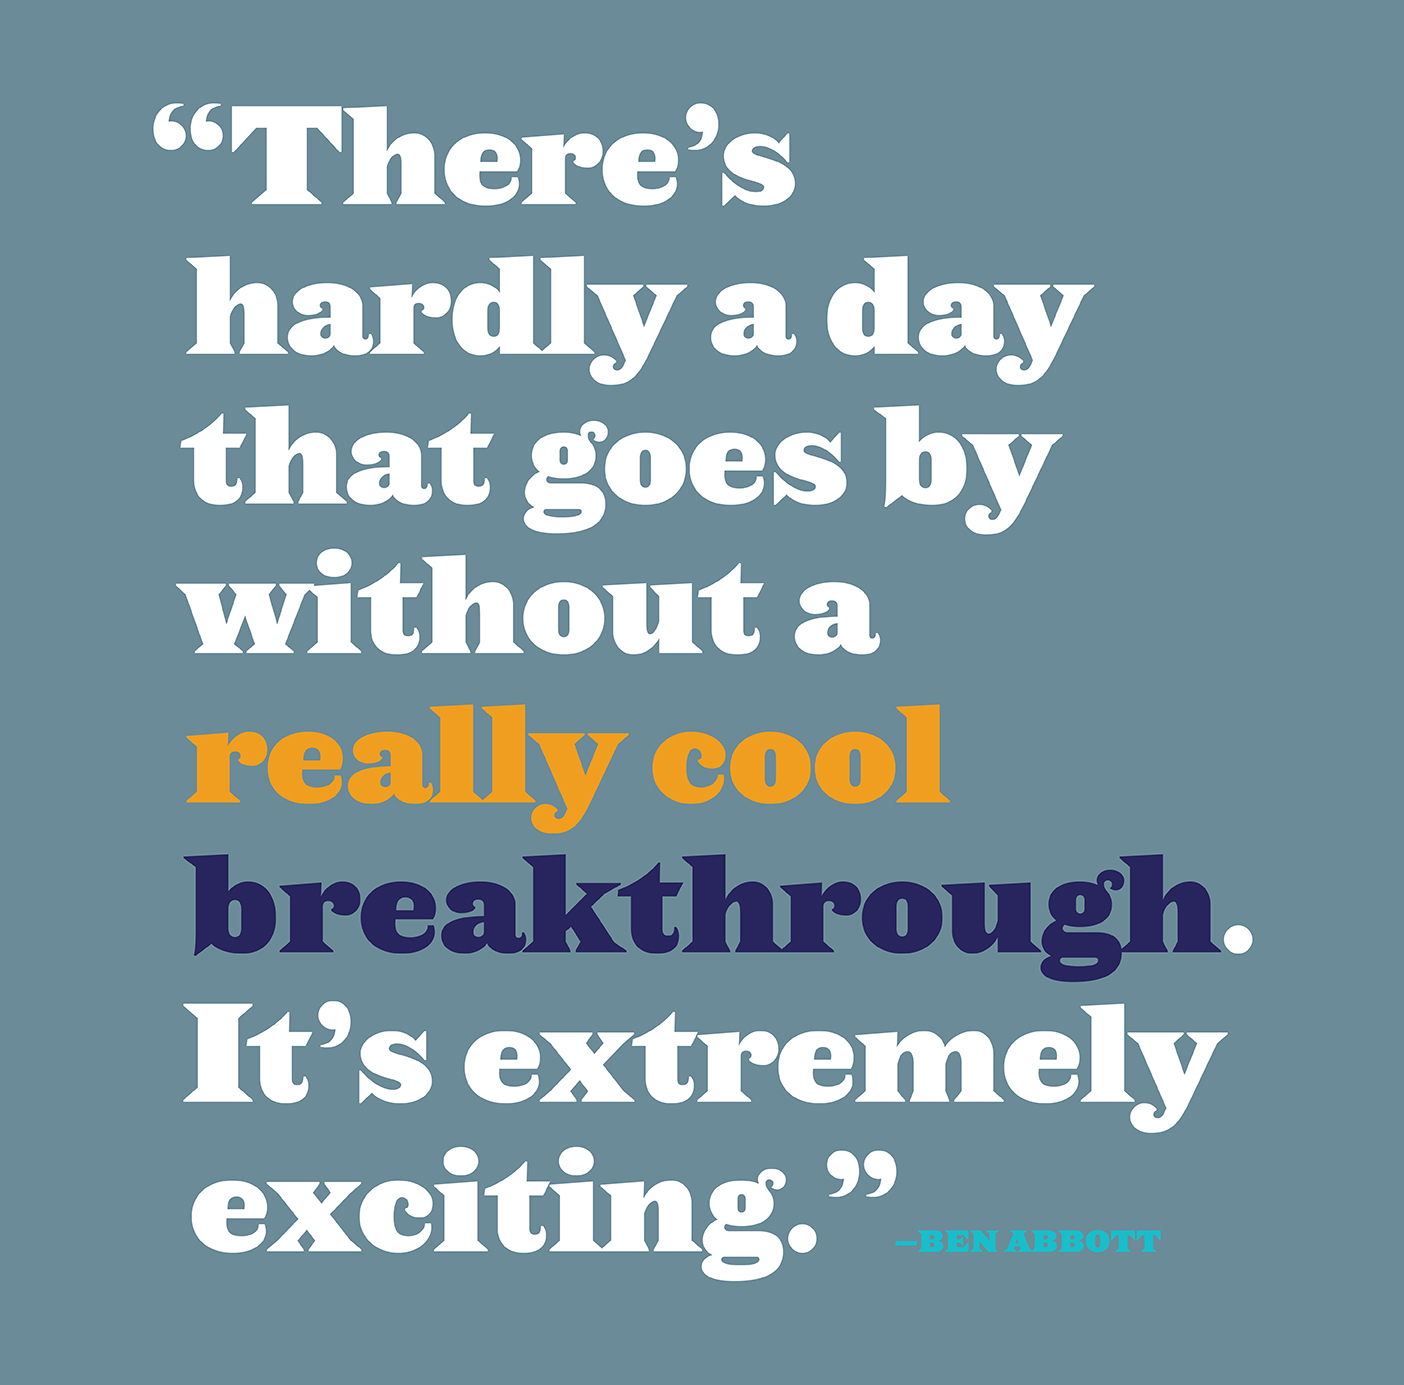 Pull quote by Ben Abbott: "There's hardly a day that goes by without a really cool breakthrough. It's extremely exciting."